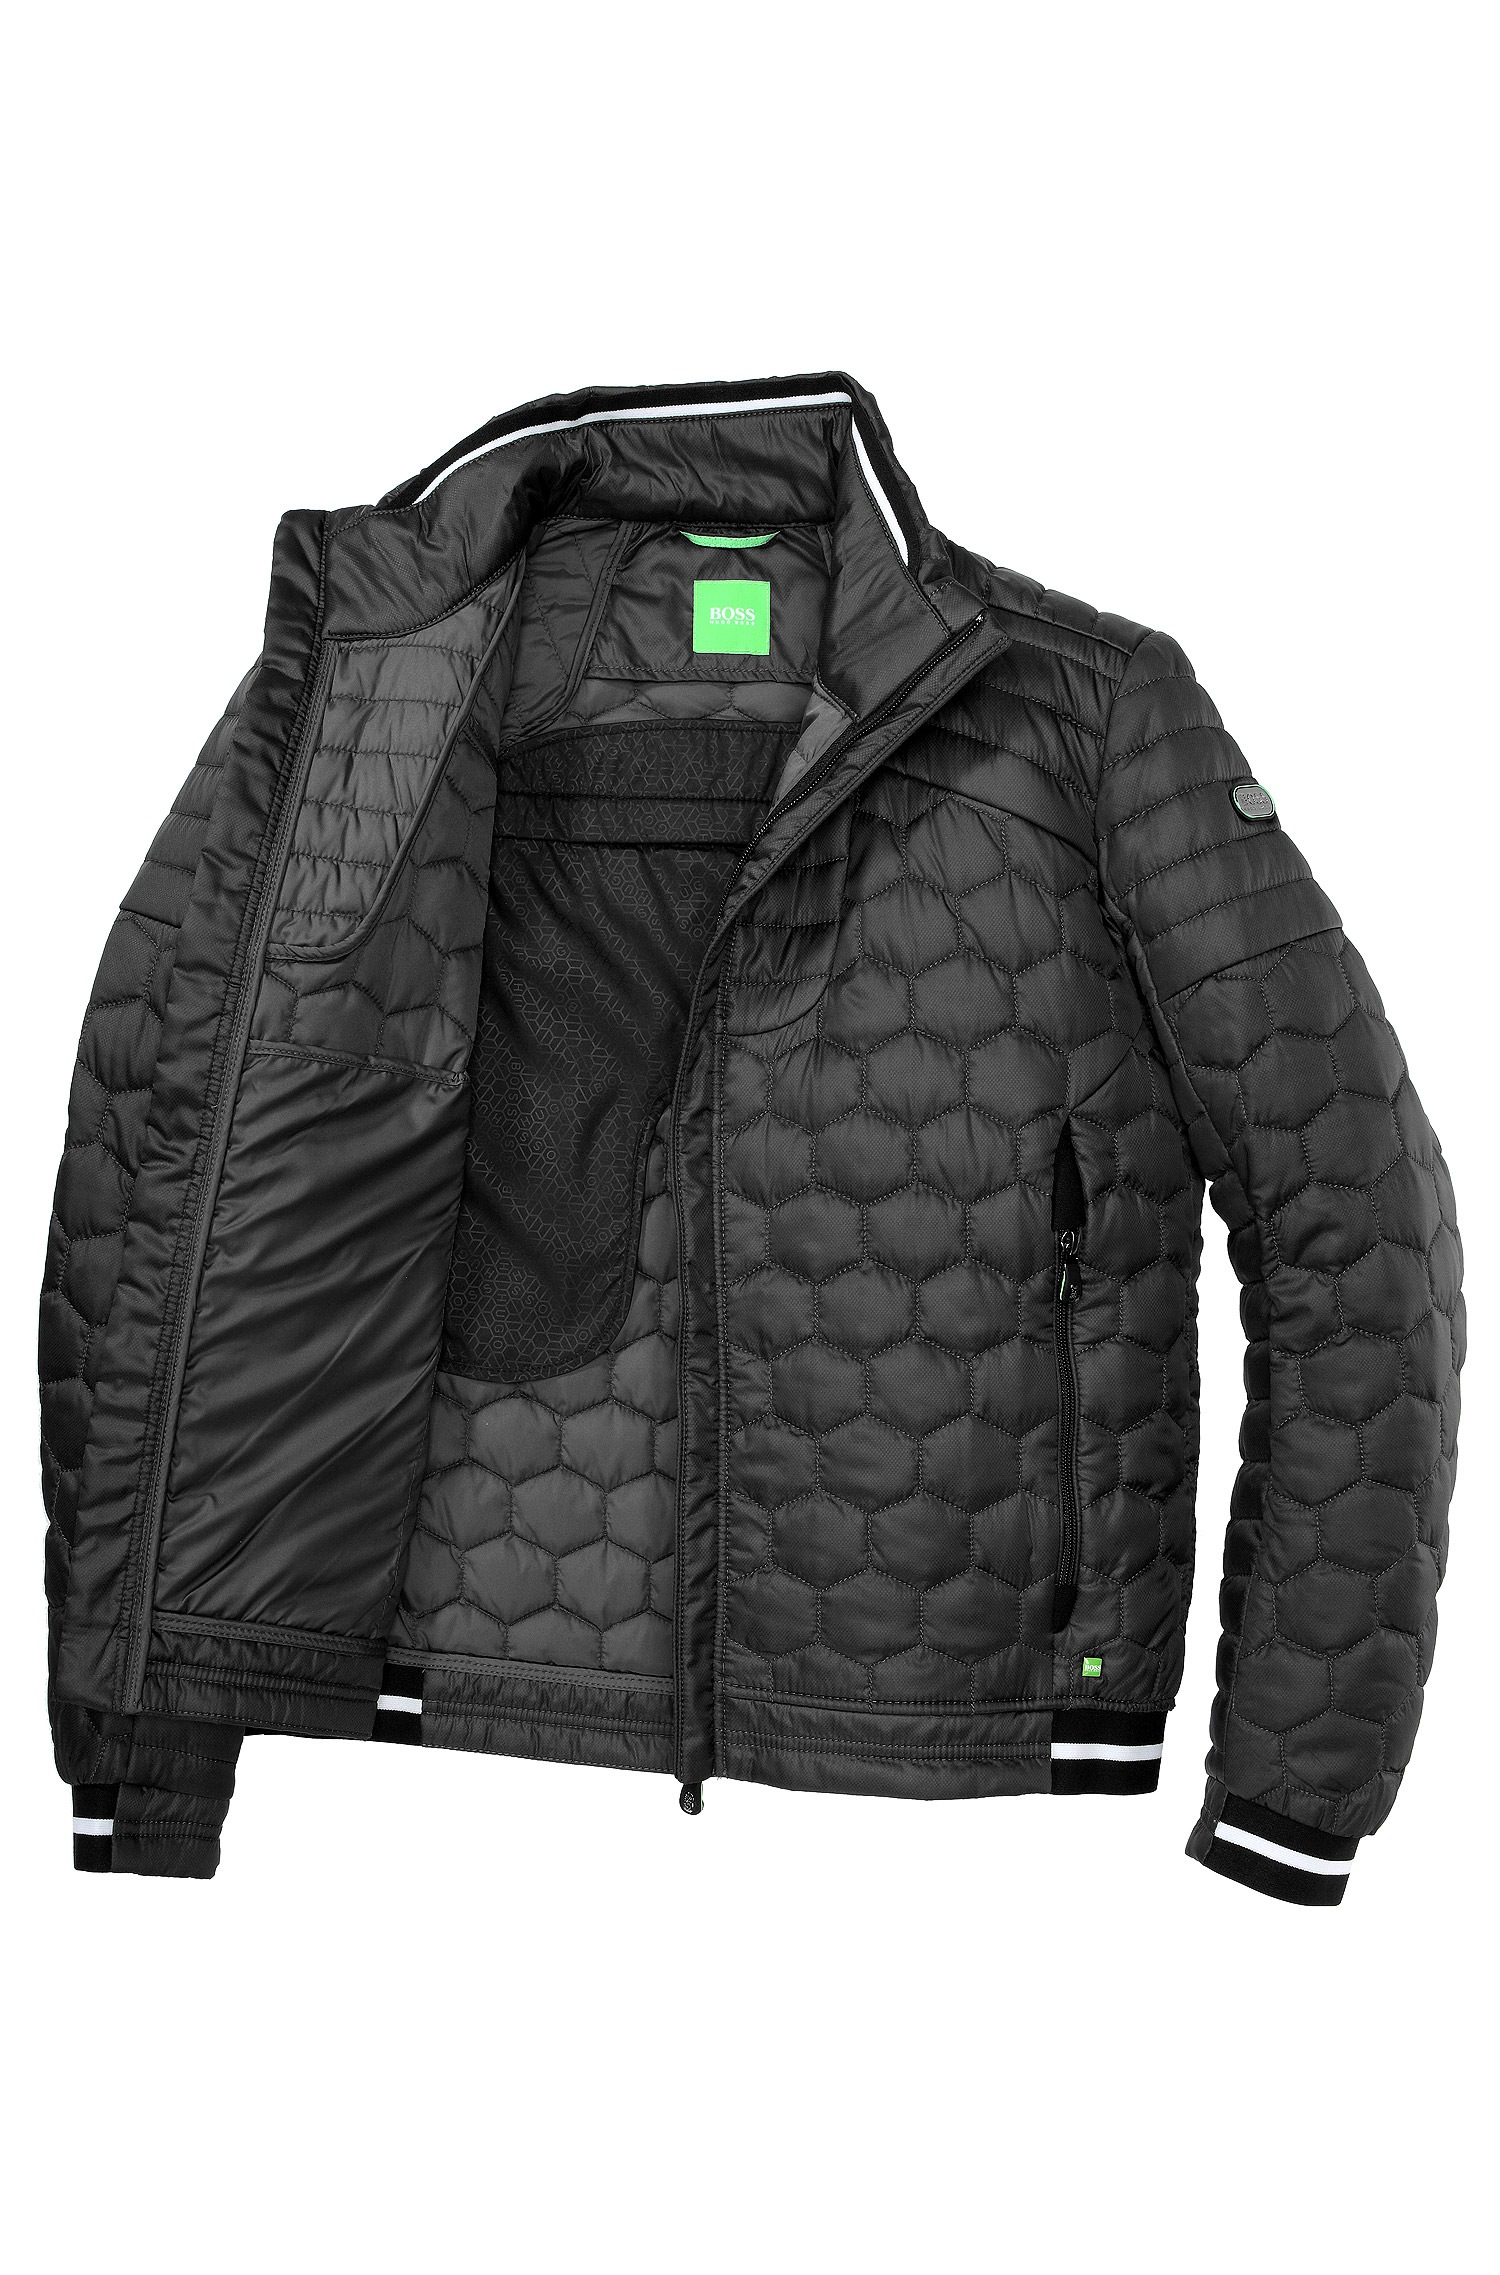 hugo boss quilted jacket mens